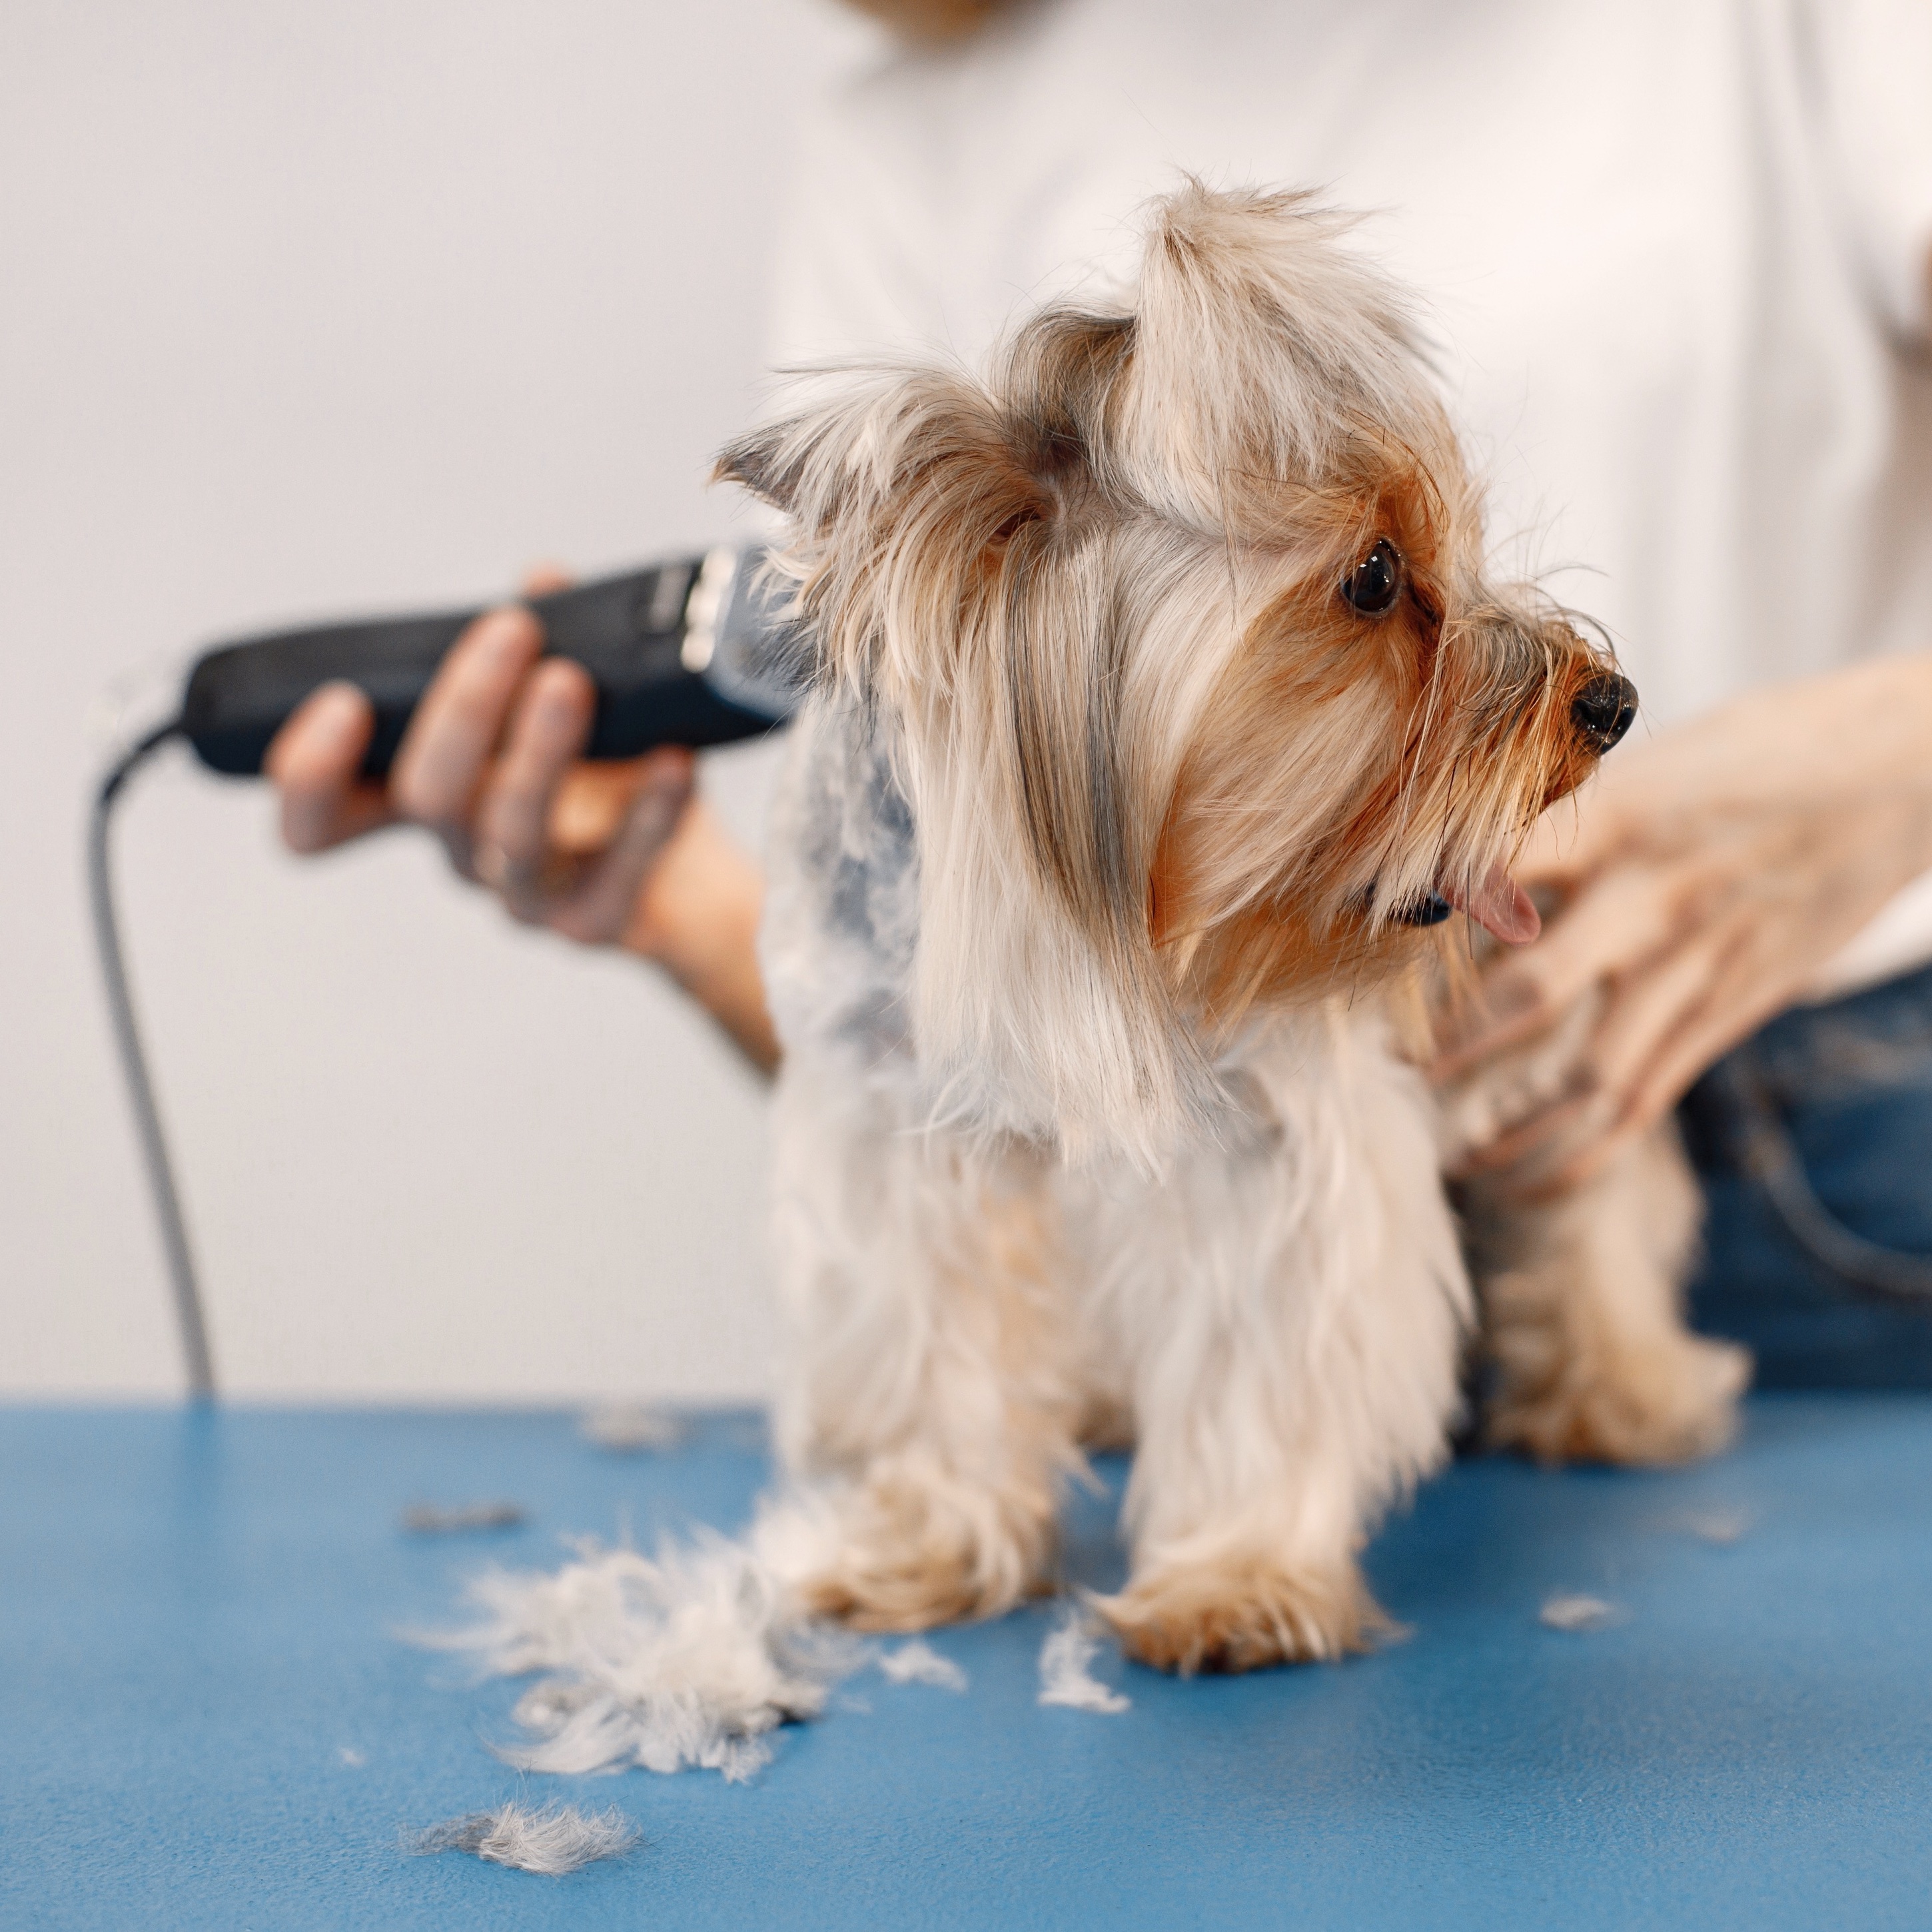 Should dogs be shaved in summer?